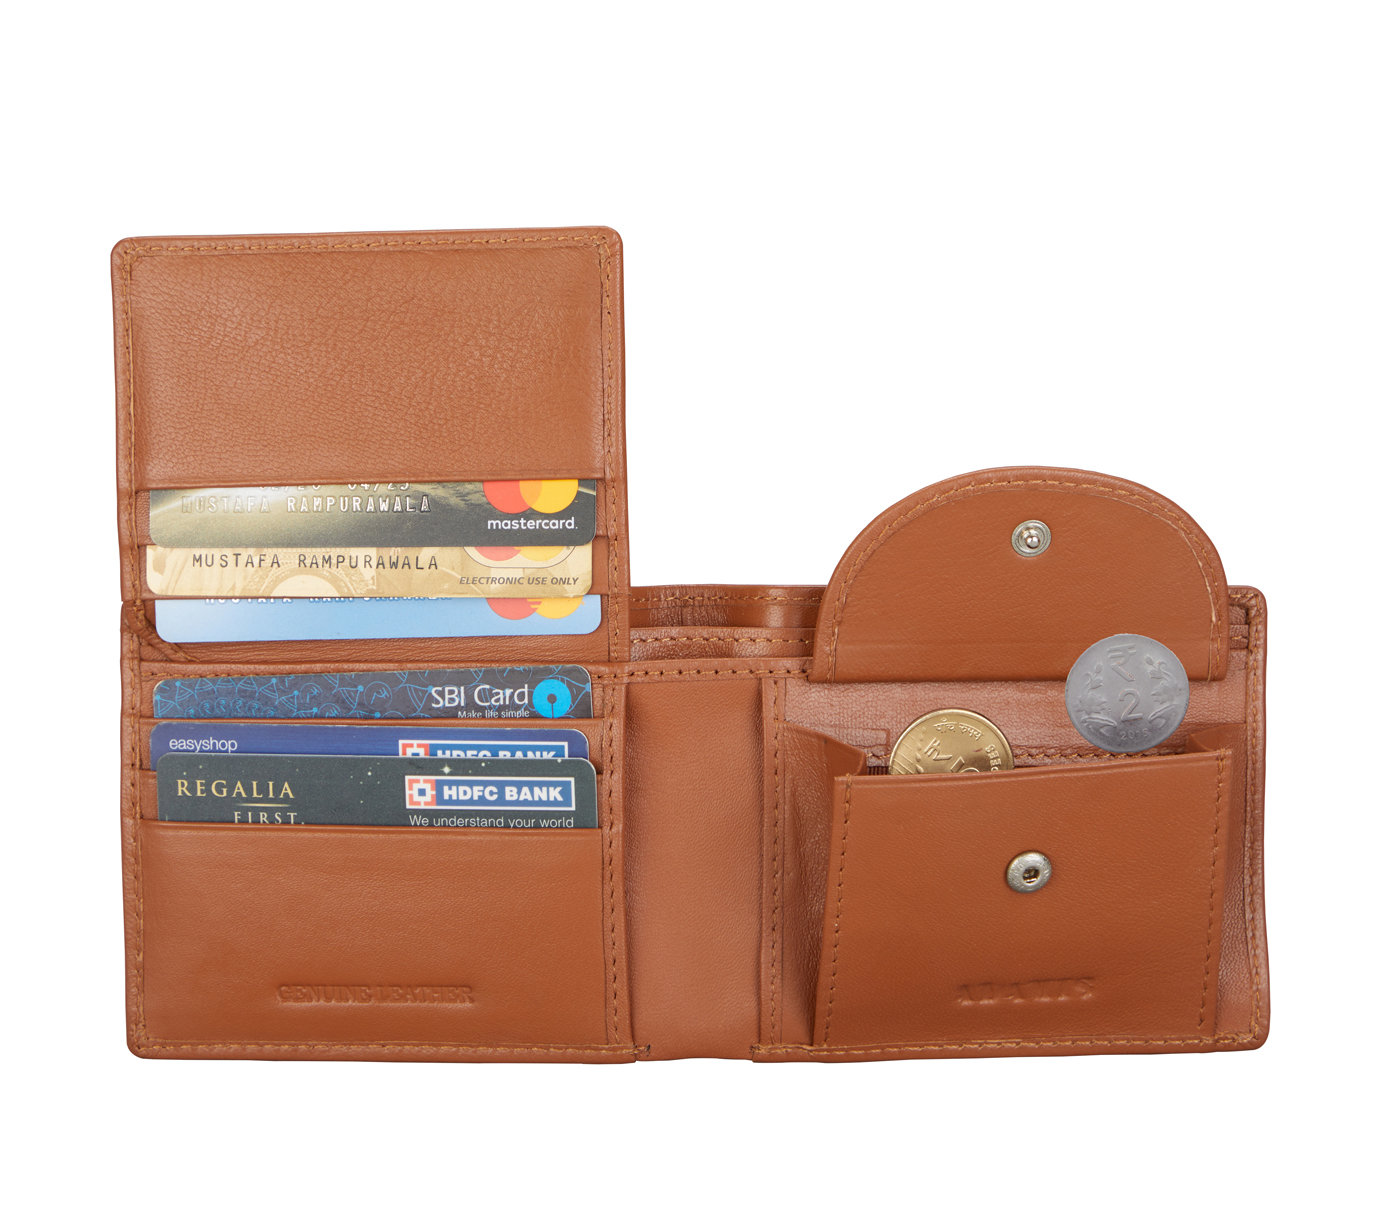 Wallet-Hudson-Men's bifold wallet with coin pocket in Genuine Leather - Tan